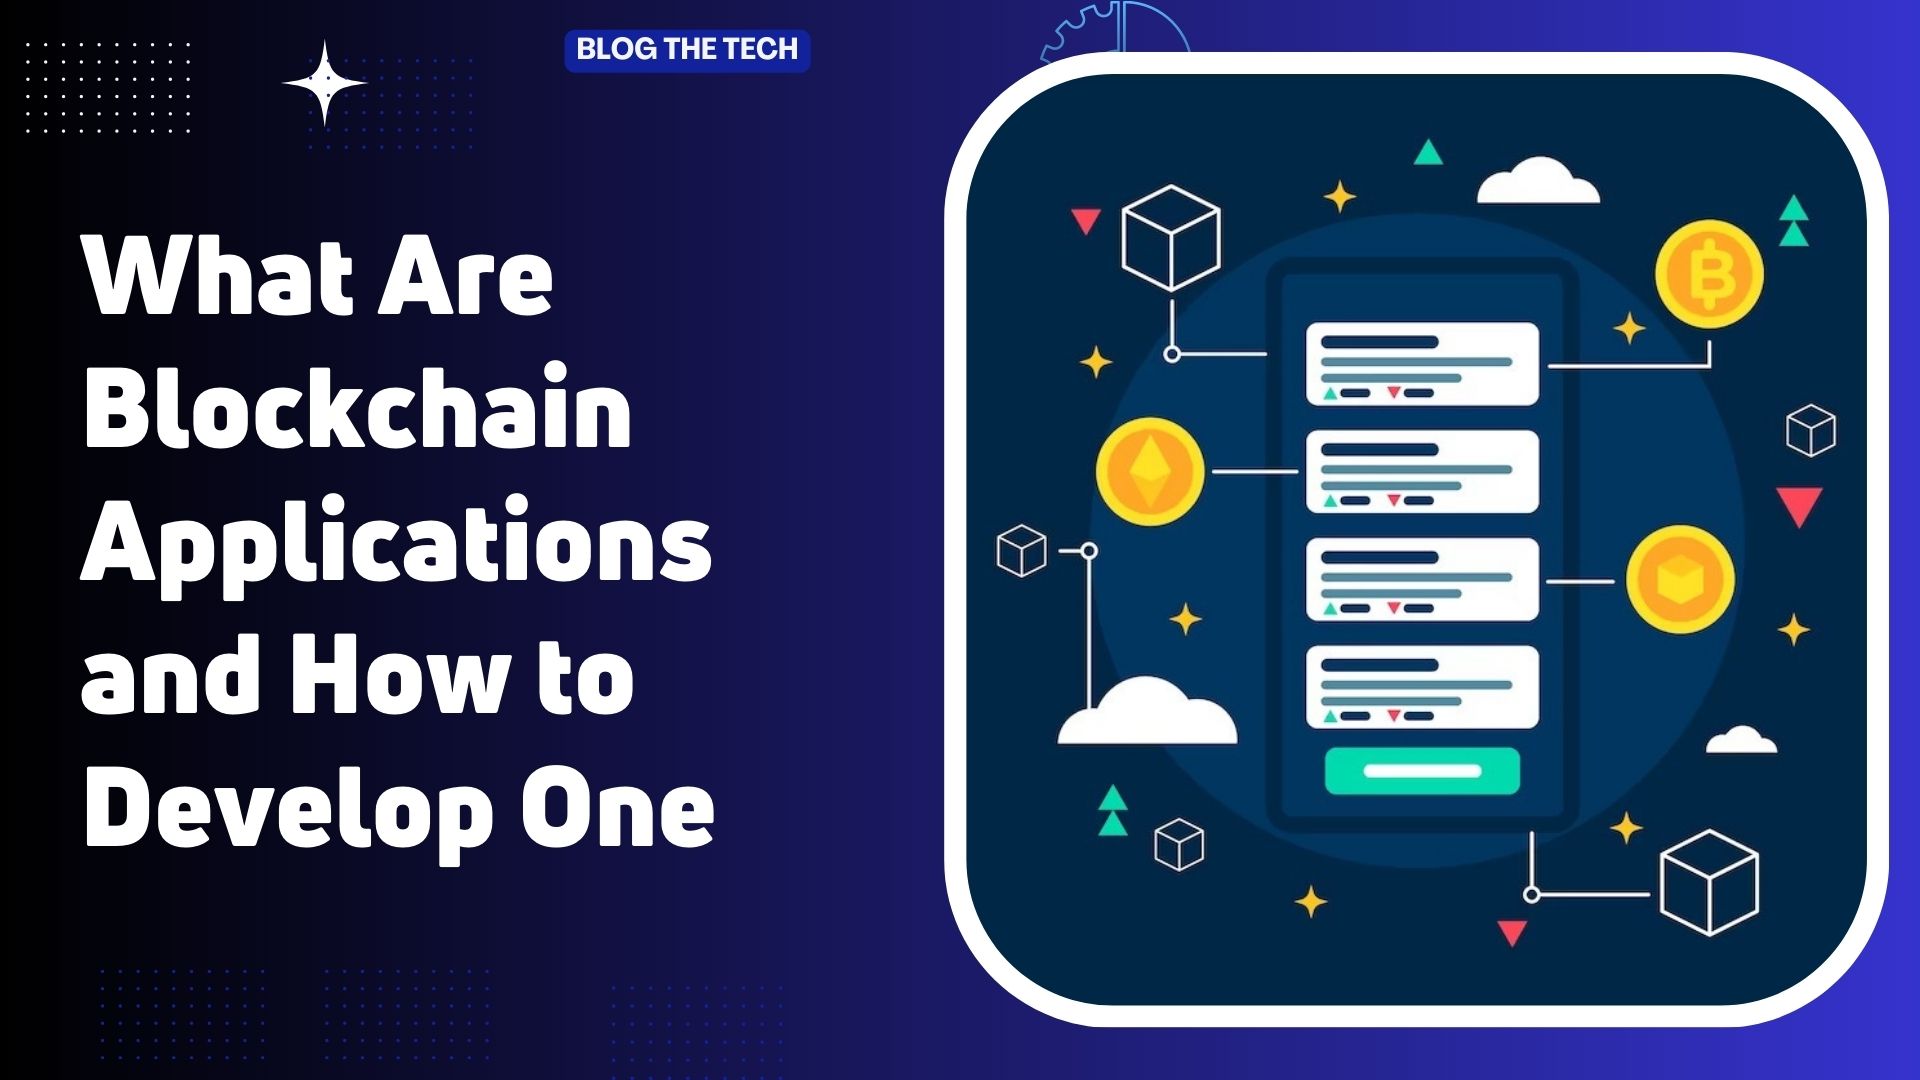 What Are Blockchain Applications and How to Develop One